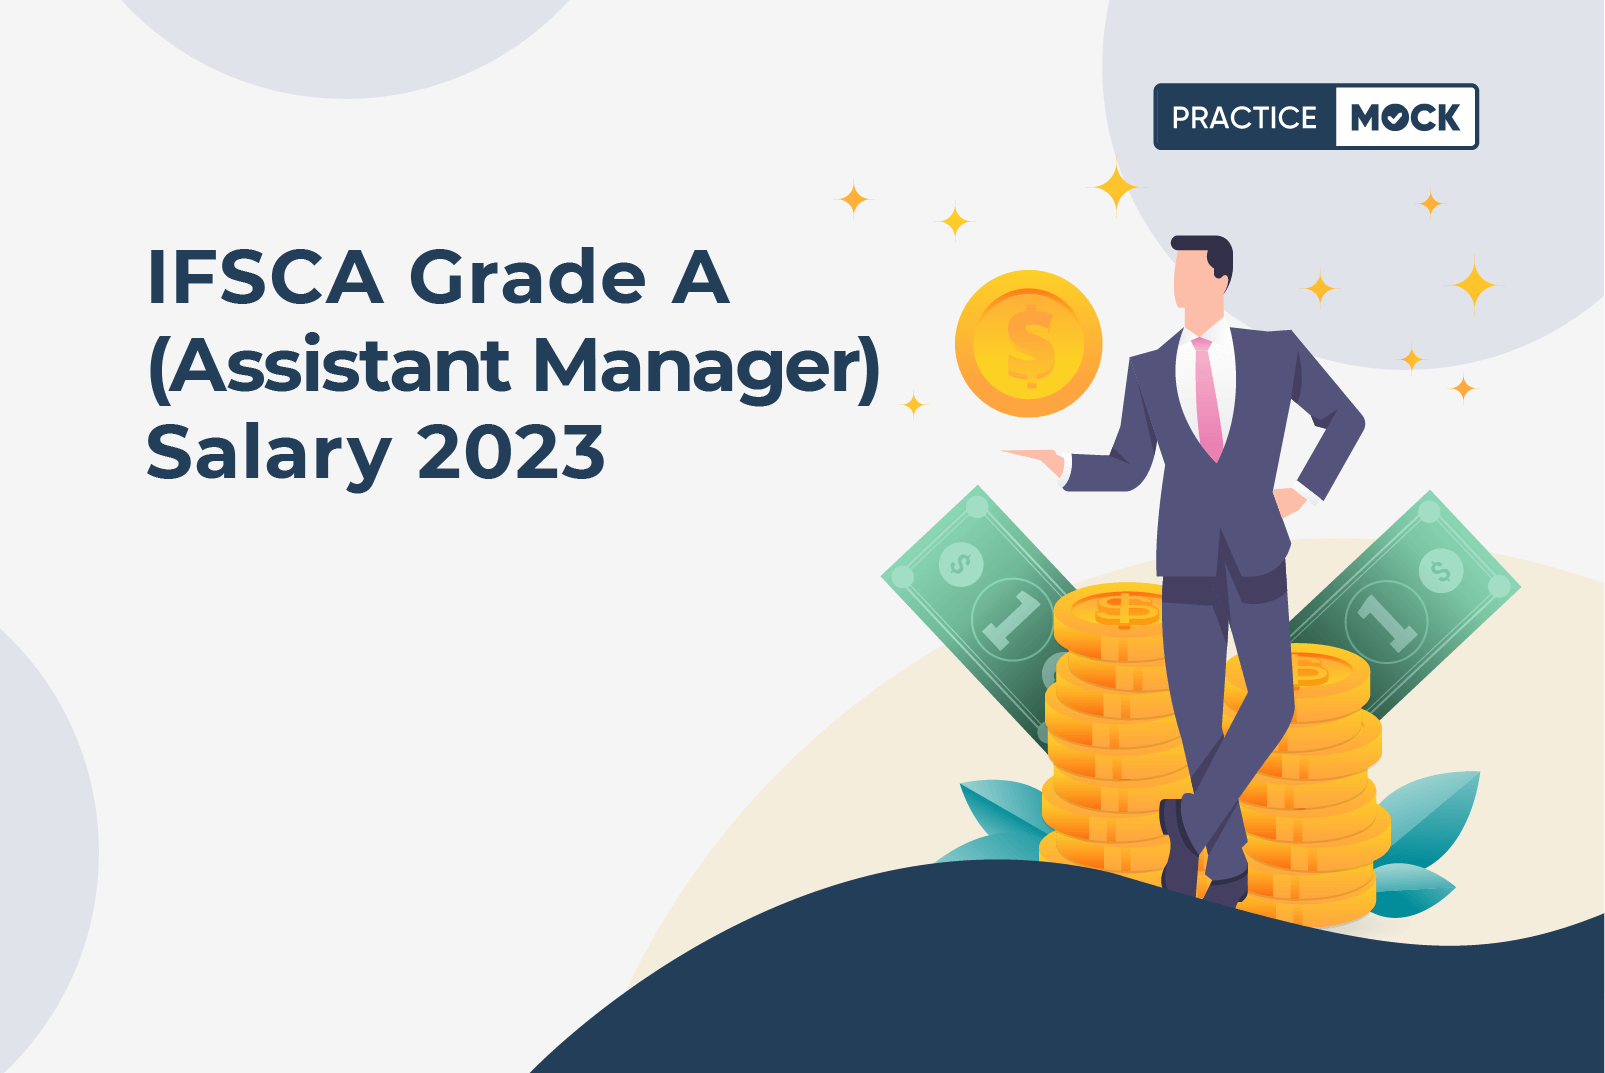 IFSCA Grade A (Assistant Manager) Salary 2023